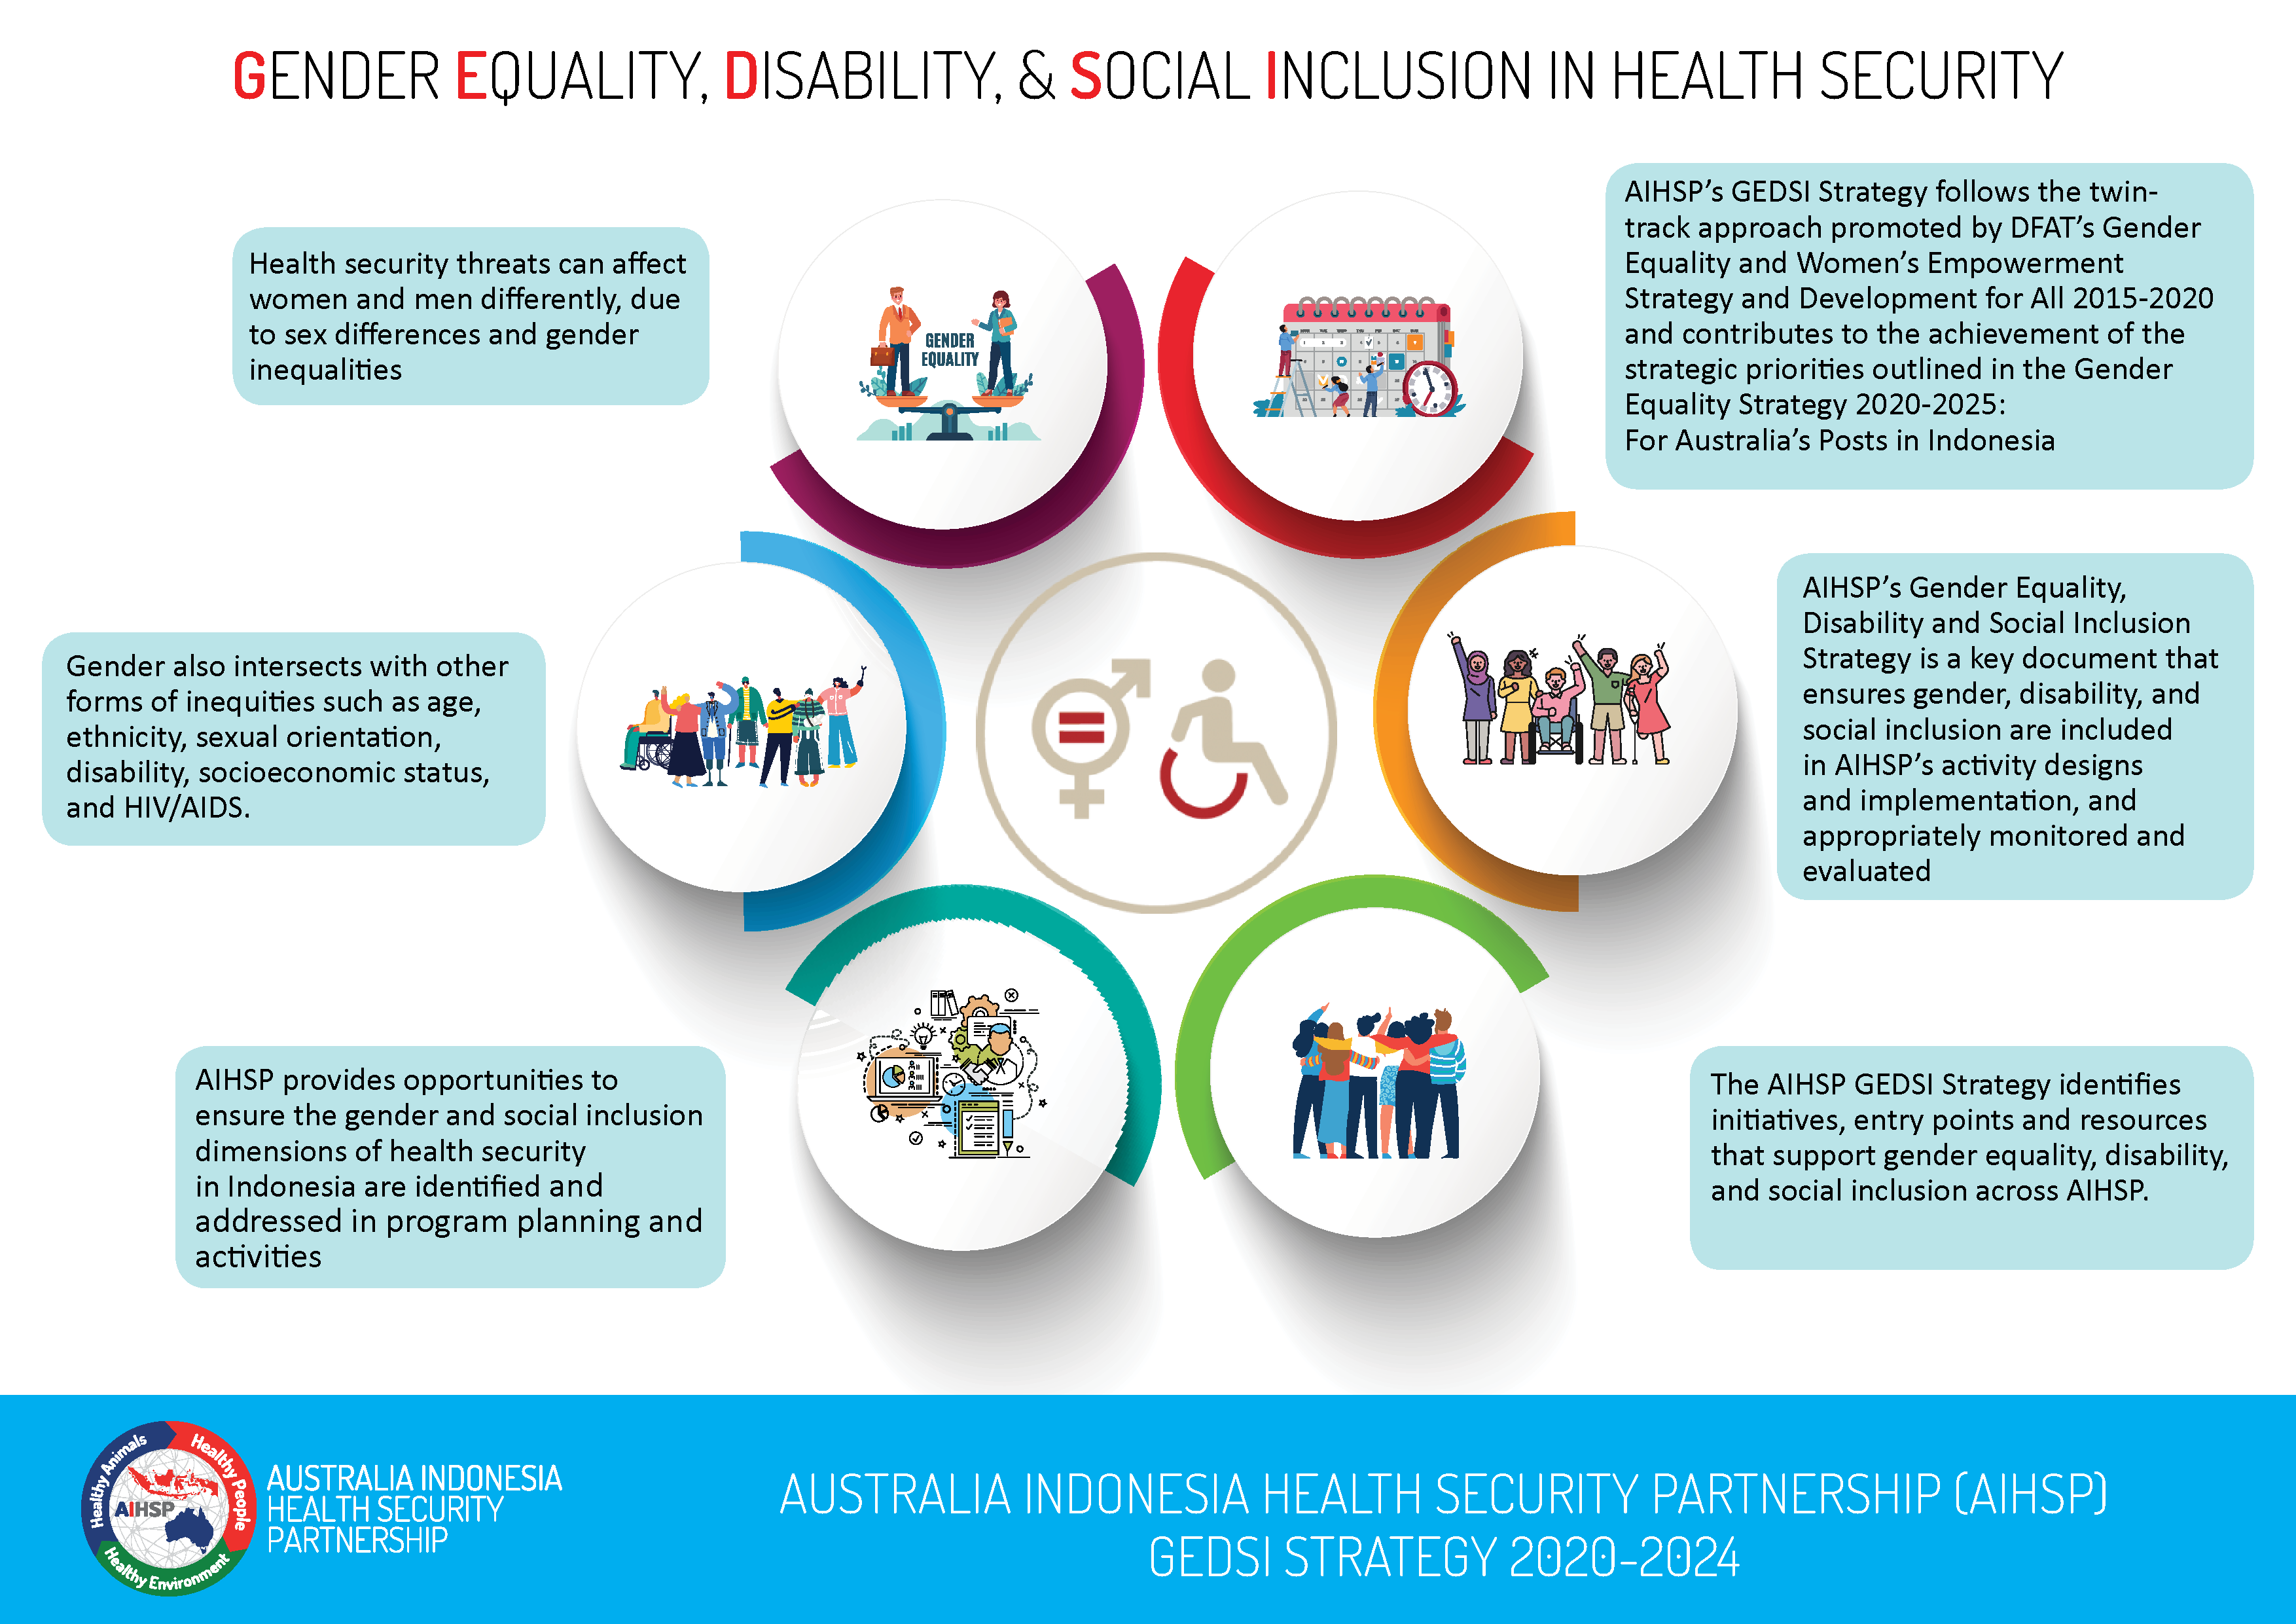 Infographic of Gender Equality, Disability and Social Inclusion (GEDSI) dimensions in health security